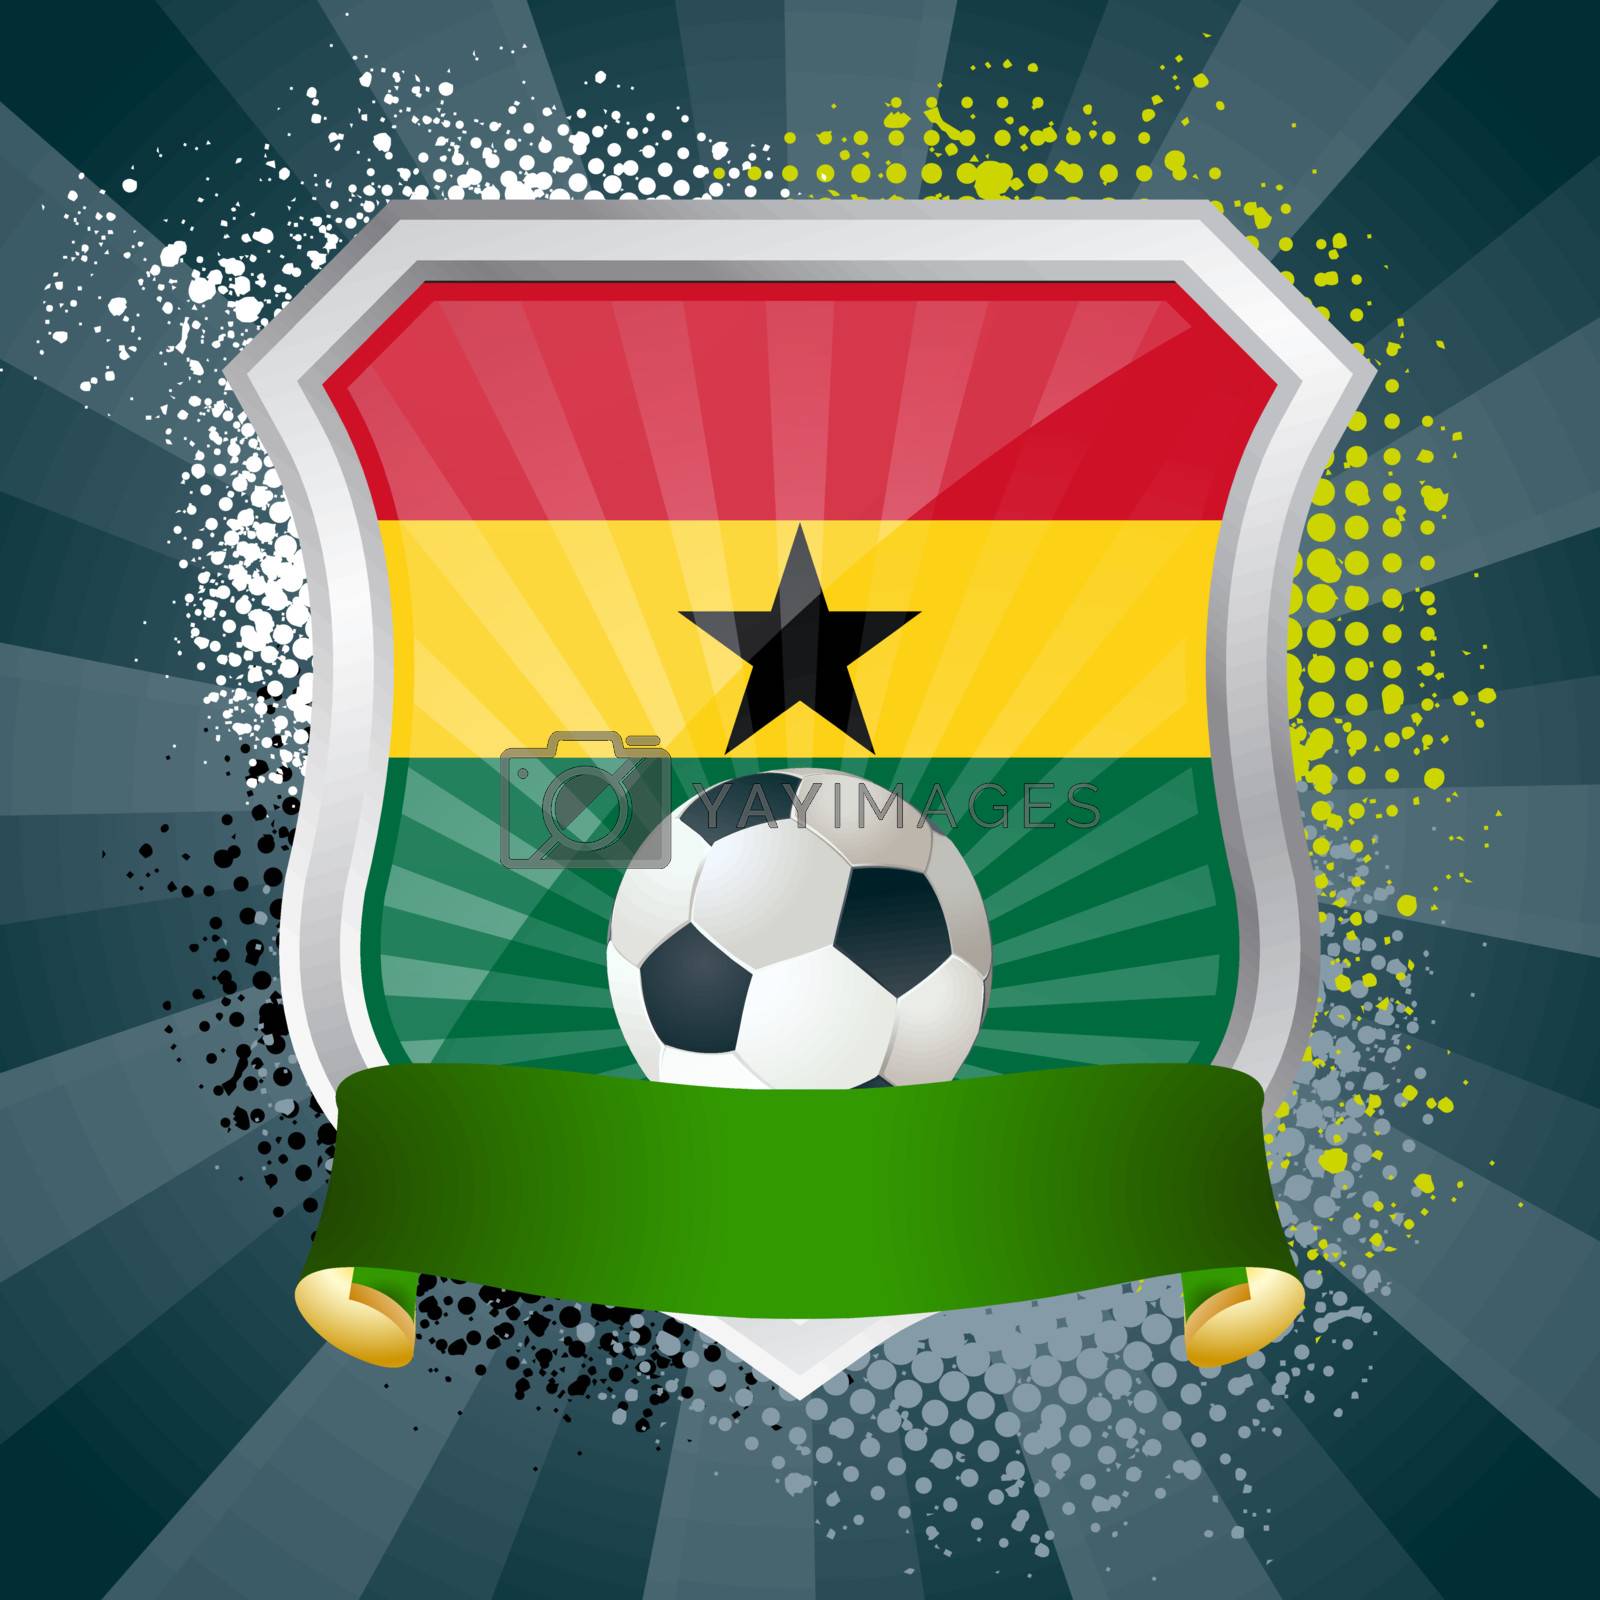 Royalty free image of Shield with flag of Ghana by Petrov_Vladimir